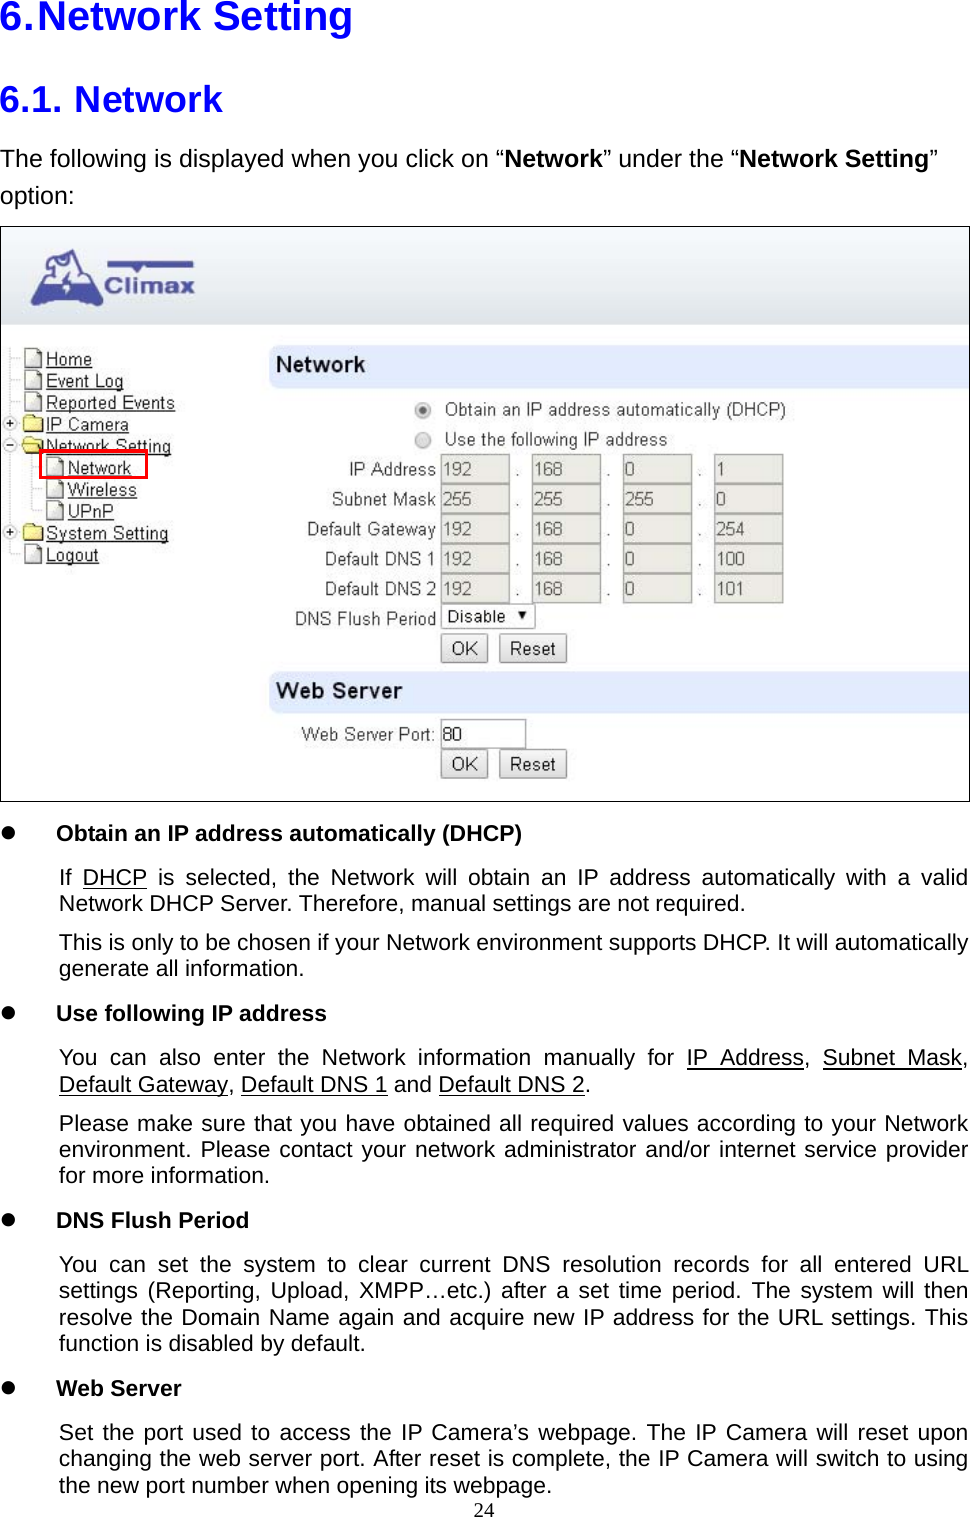 24  6. Network  Setting 6.1. Network The following is displayed when you click on “Network” under the “Network Setting” option:  z Obtain an IP address automatically (DHCP) If DHCP is selected, the Network will obtain an IP address automatically with a valid Network DHCP Server. Therefore, manual settings are not required. This is only to be chosen if your Network environment supports DHCP. It will automatically generate all information. z Use following IP address You can also enter the Network information manually for IP Address, Subnet Mask, Default Gateway, Default DNS 1 and Default DNS 2. Please make sure that you have obtained all required values according to your Network environment. Please contact your network administrator and/or internet service provider for more information. z DNS Flush Period You can set the system to clear current DNS resolution records for all entered URL settings (Reporting, Upload, XMPP…etc.) after a set time period. The system will then resolve the Domain Name again and acquire new IP address for the URL settings. This function is disabled by default. z Web Server Set the port used to access the IP Camera’s webpage. The IP Camera will reset upon changing the web server port. After reset is complete, the IP Camera will switch to using the new port number when opening its webpage. 